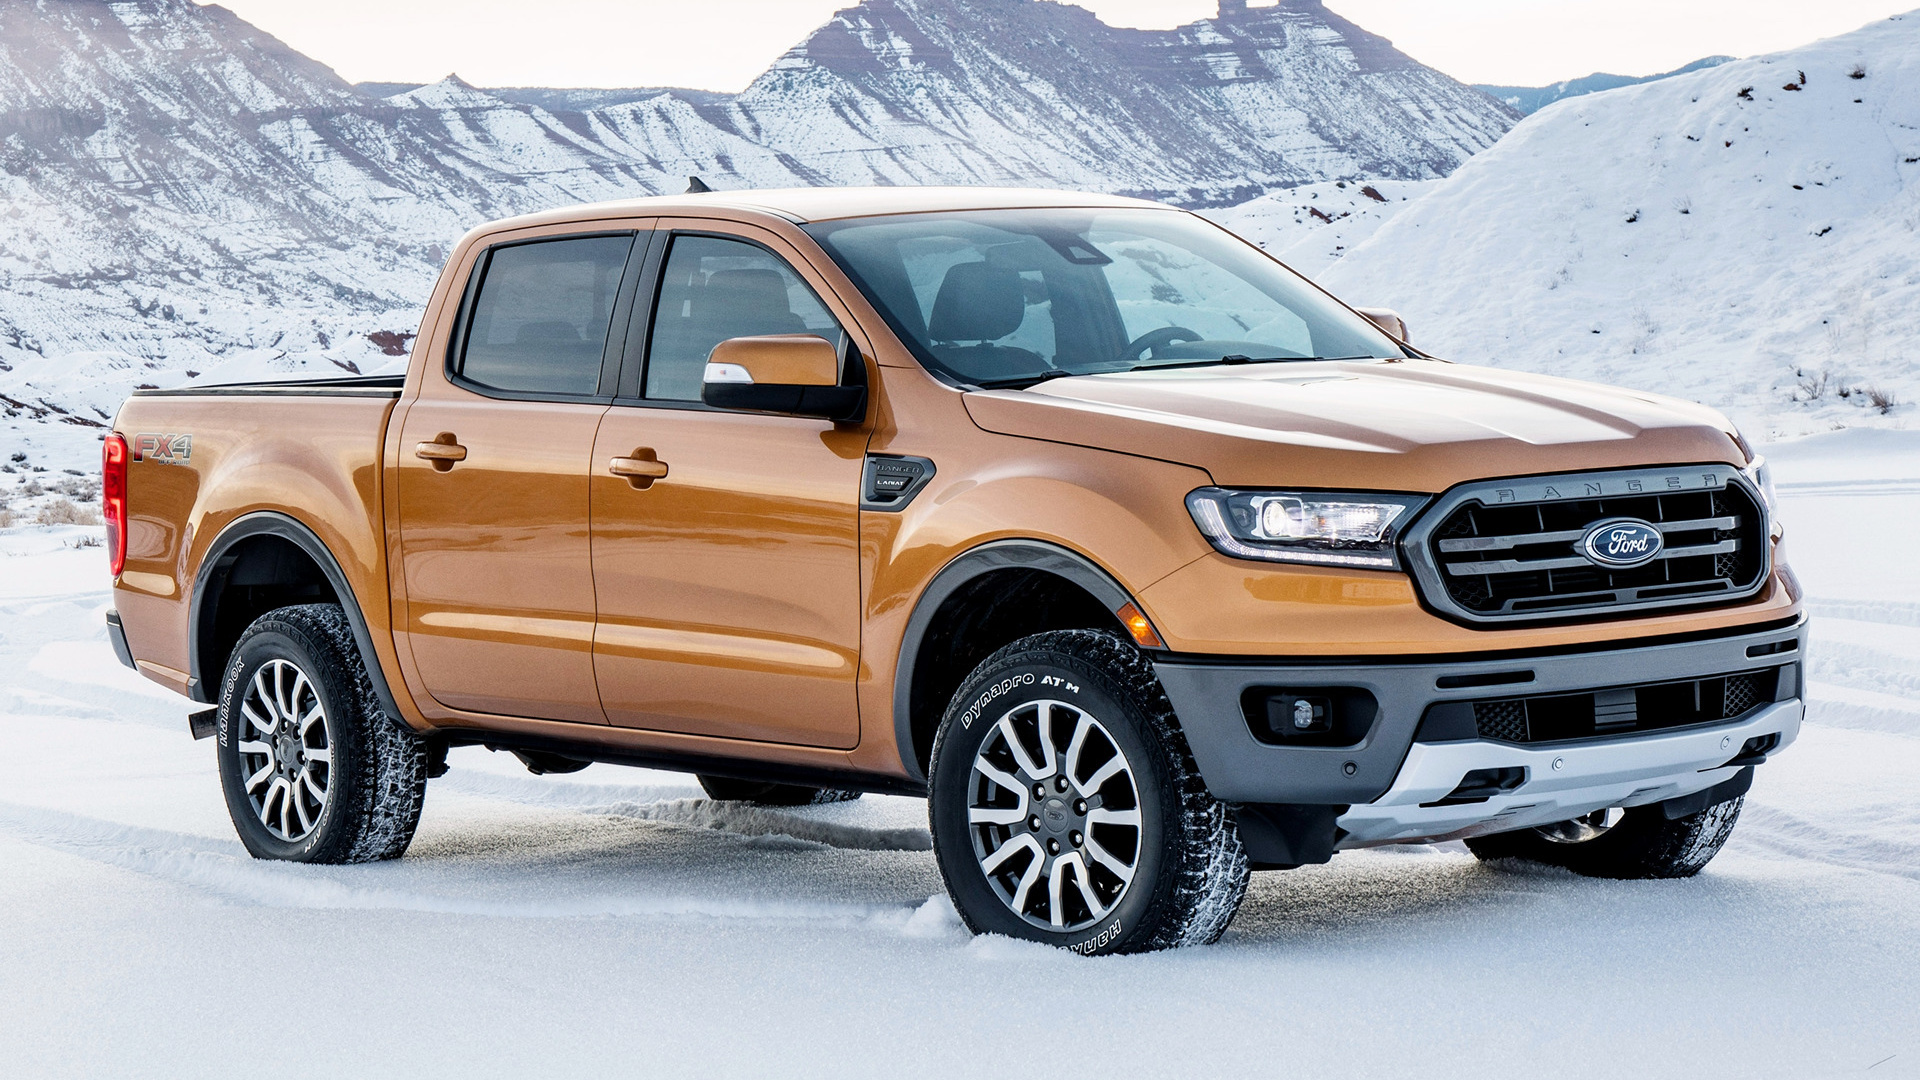 Ford Ranger: 2019 Lariat FX4 SuperCrew, The car was first introduced in North America in 1983. 1920x1080 Full HD Background.